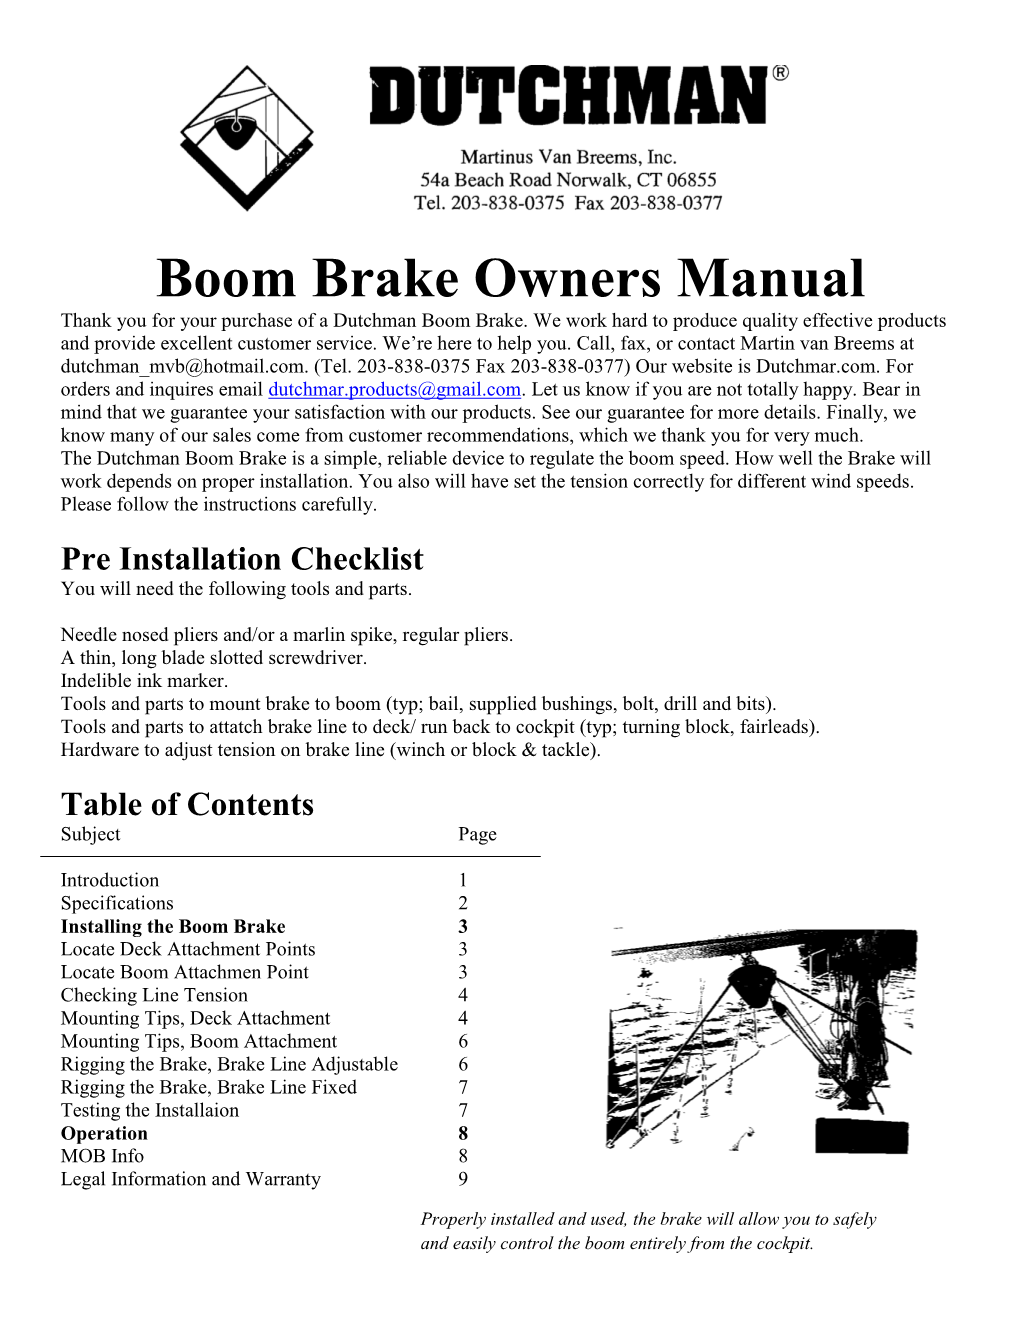 Boom Brake Owners Manual Thank You for Your Purchase of a Dutchman Boom Brake